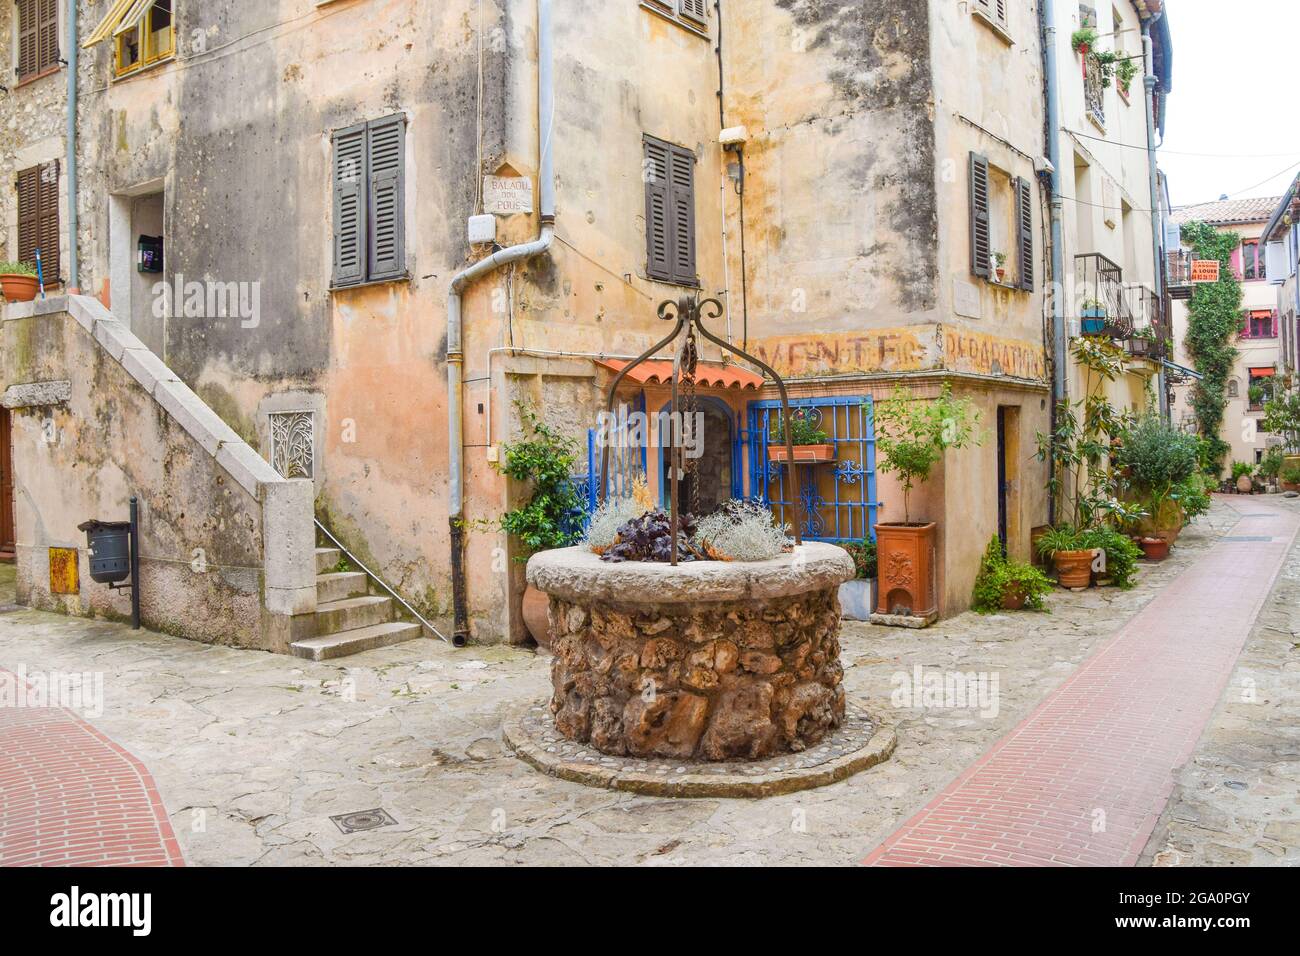 Old well in La Turbie medieval village, South of France Stock Photo